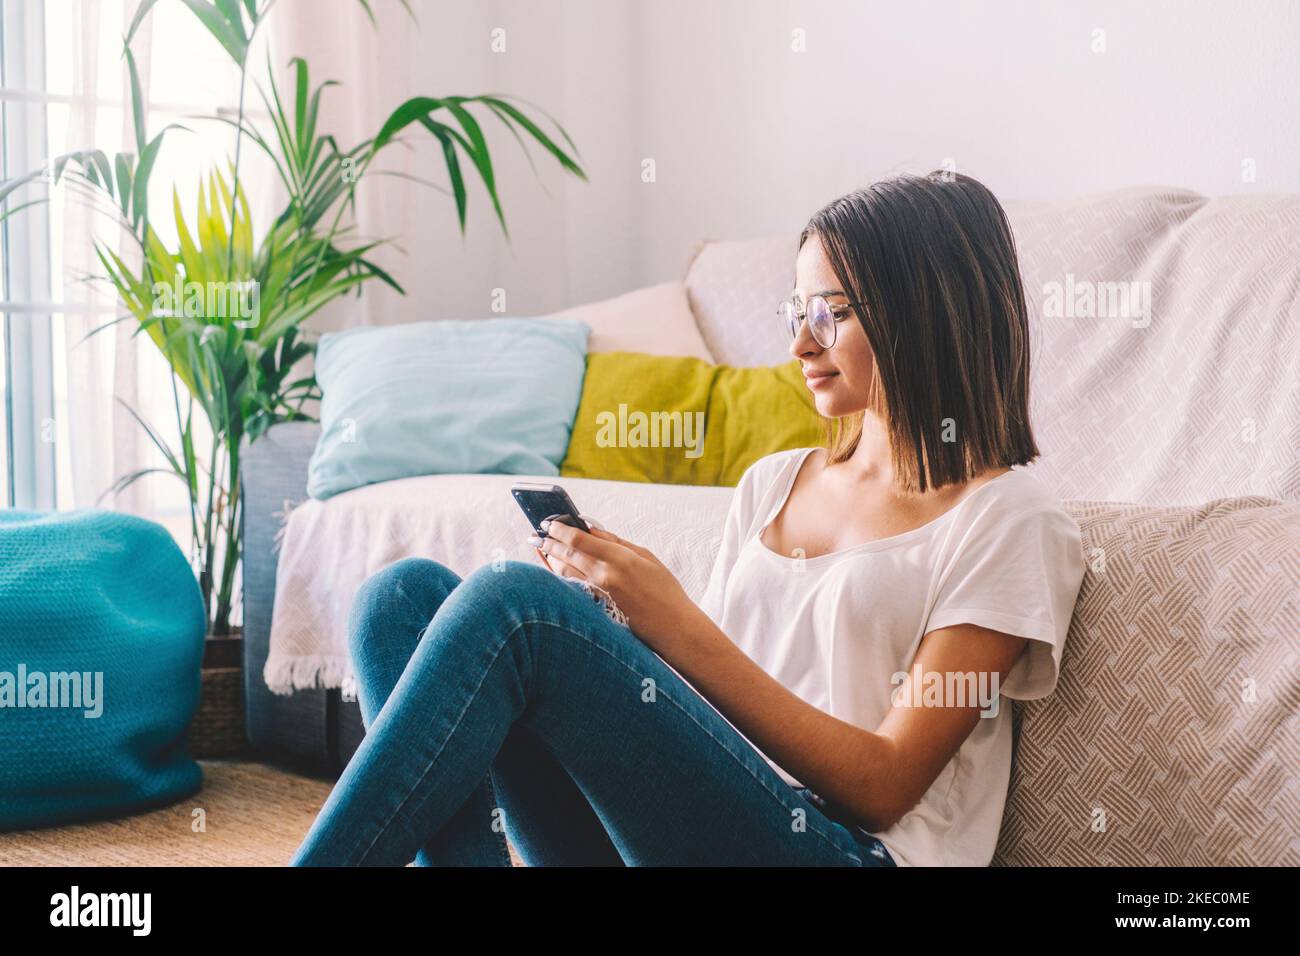 Serious woman in eyeglasses text messaging using mobile phone while sitting on floor in the living room of her house. Beautiful lady spending leisure time using smartphone at home Stock Photo